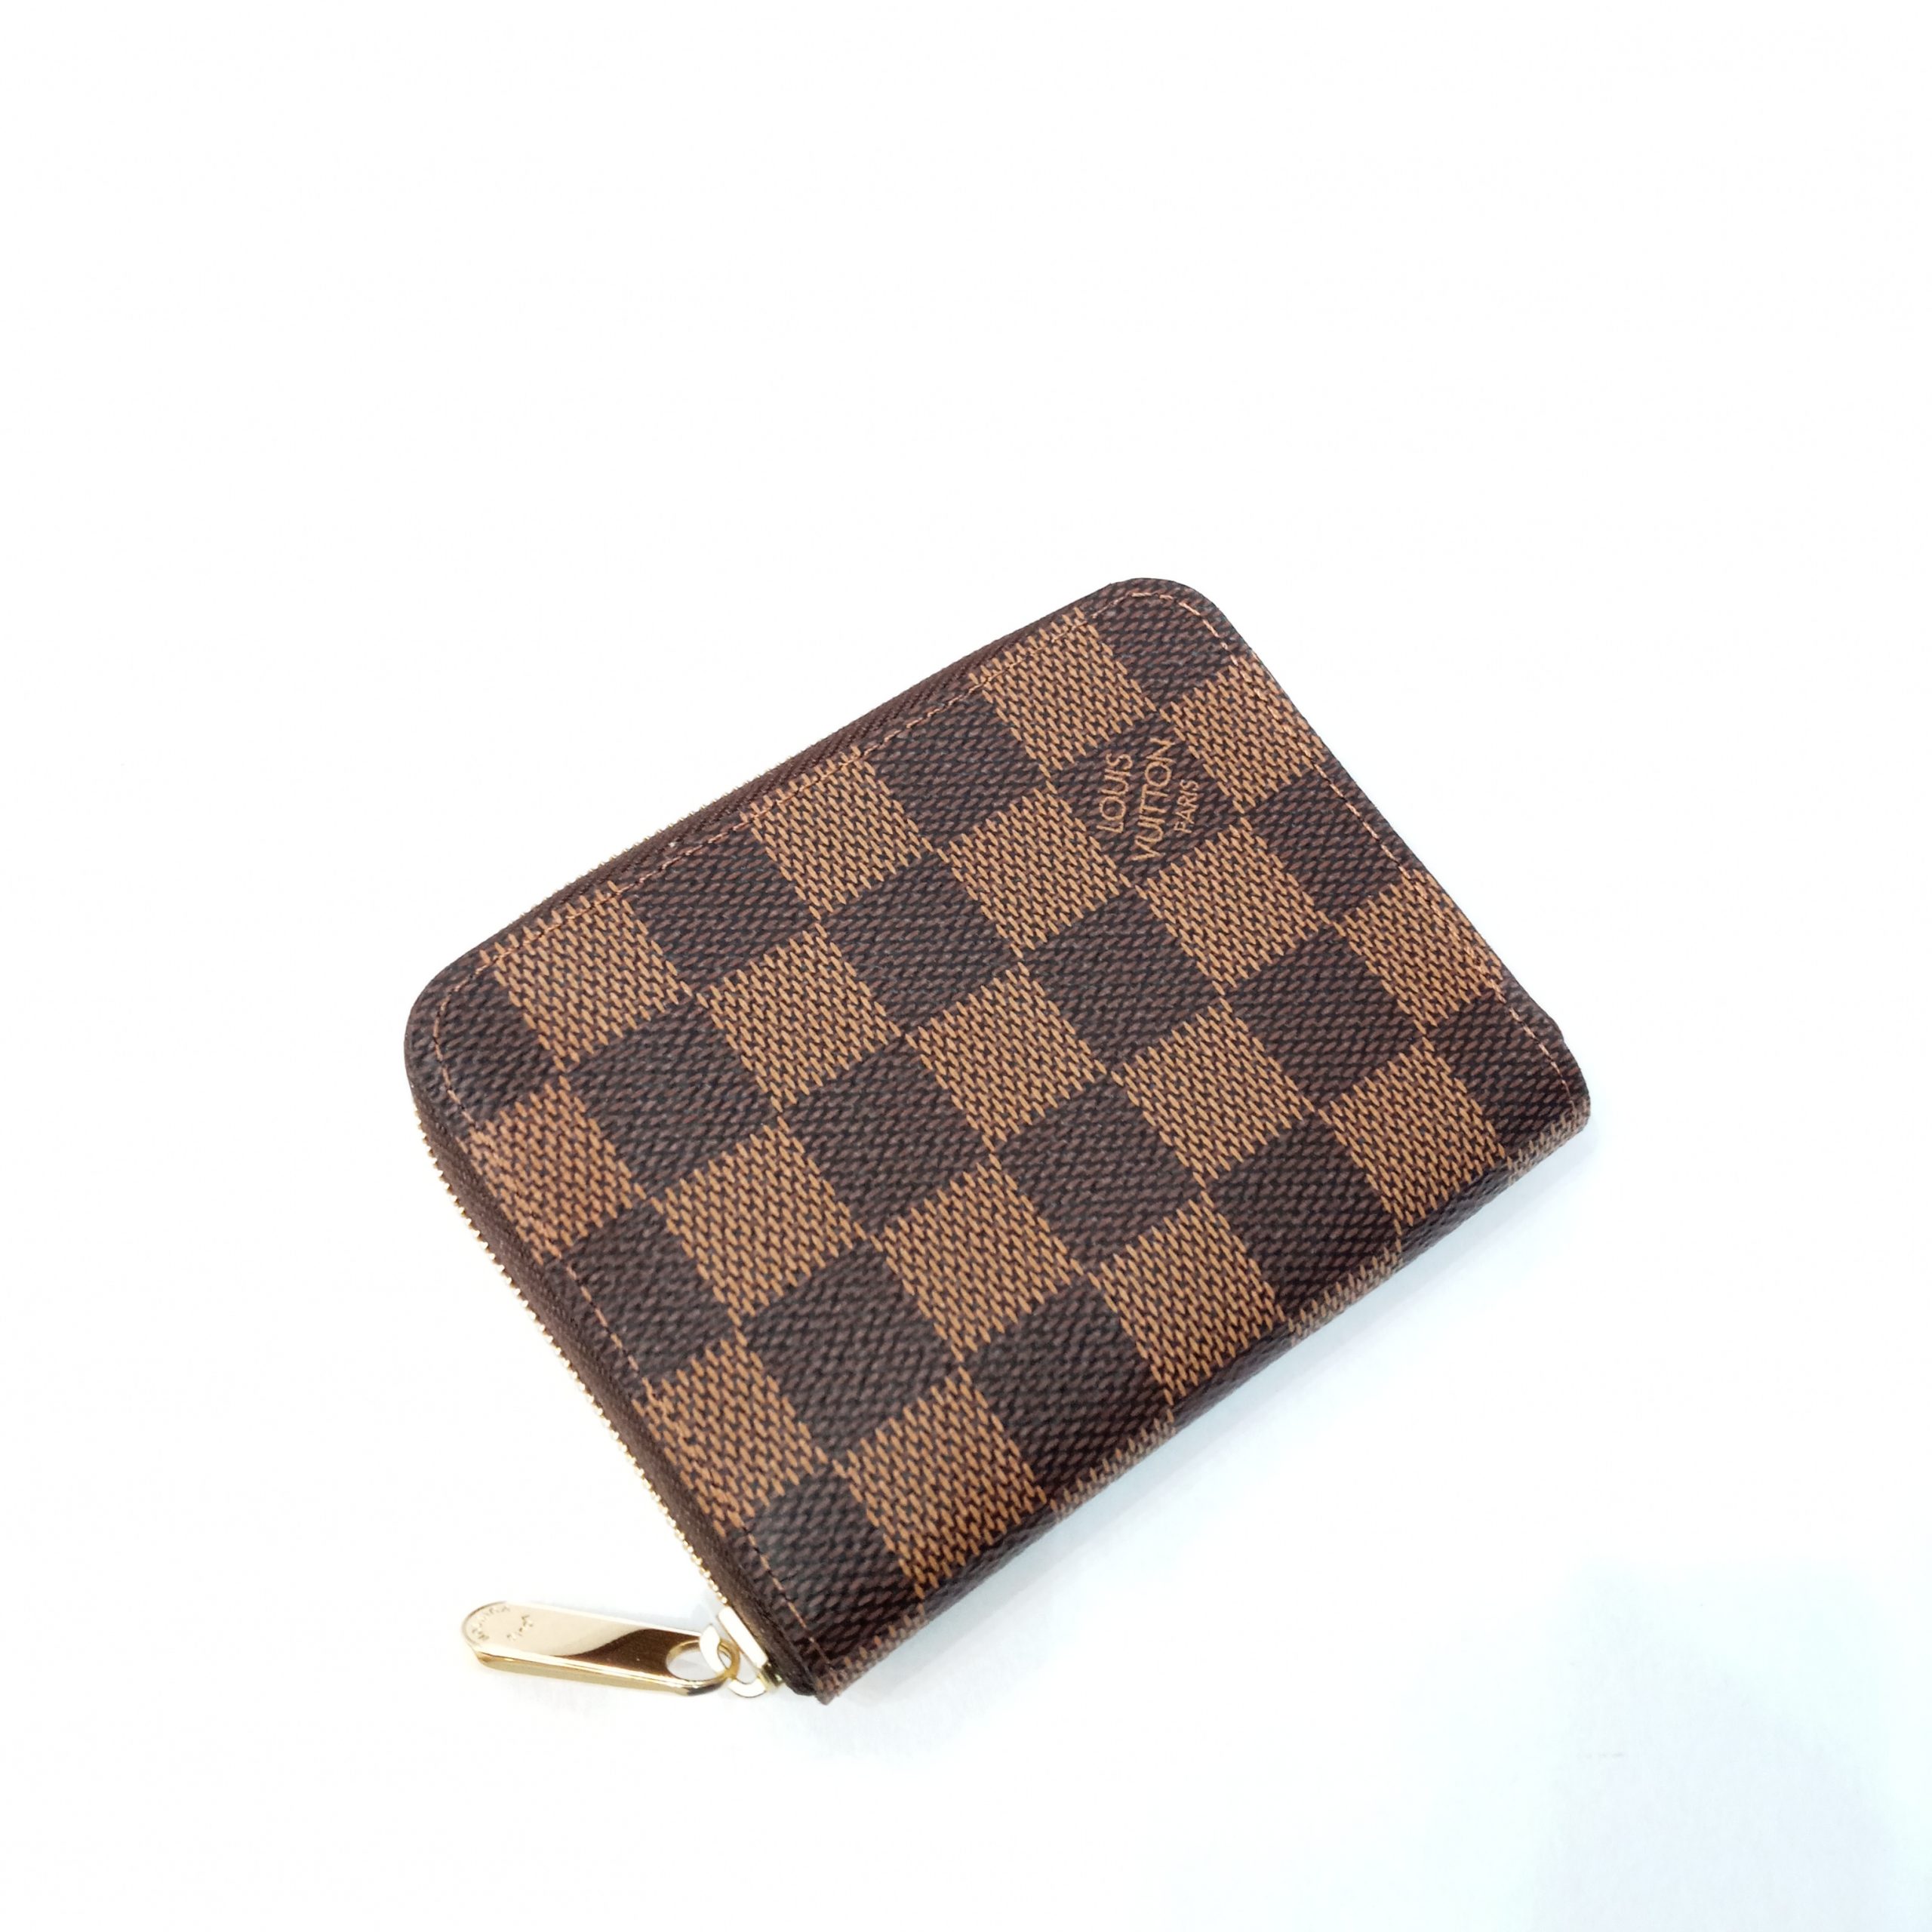 Zippy Wallet Monogram Canvas  Wallets and Small Leather Goods  LOUIS  VUITTON